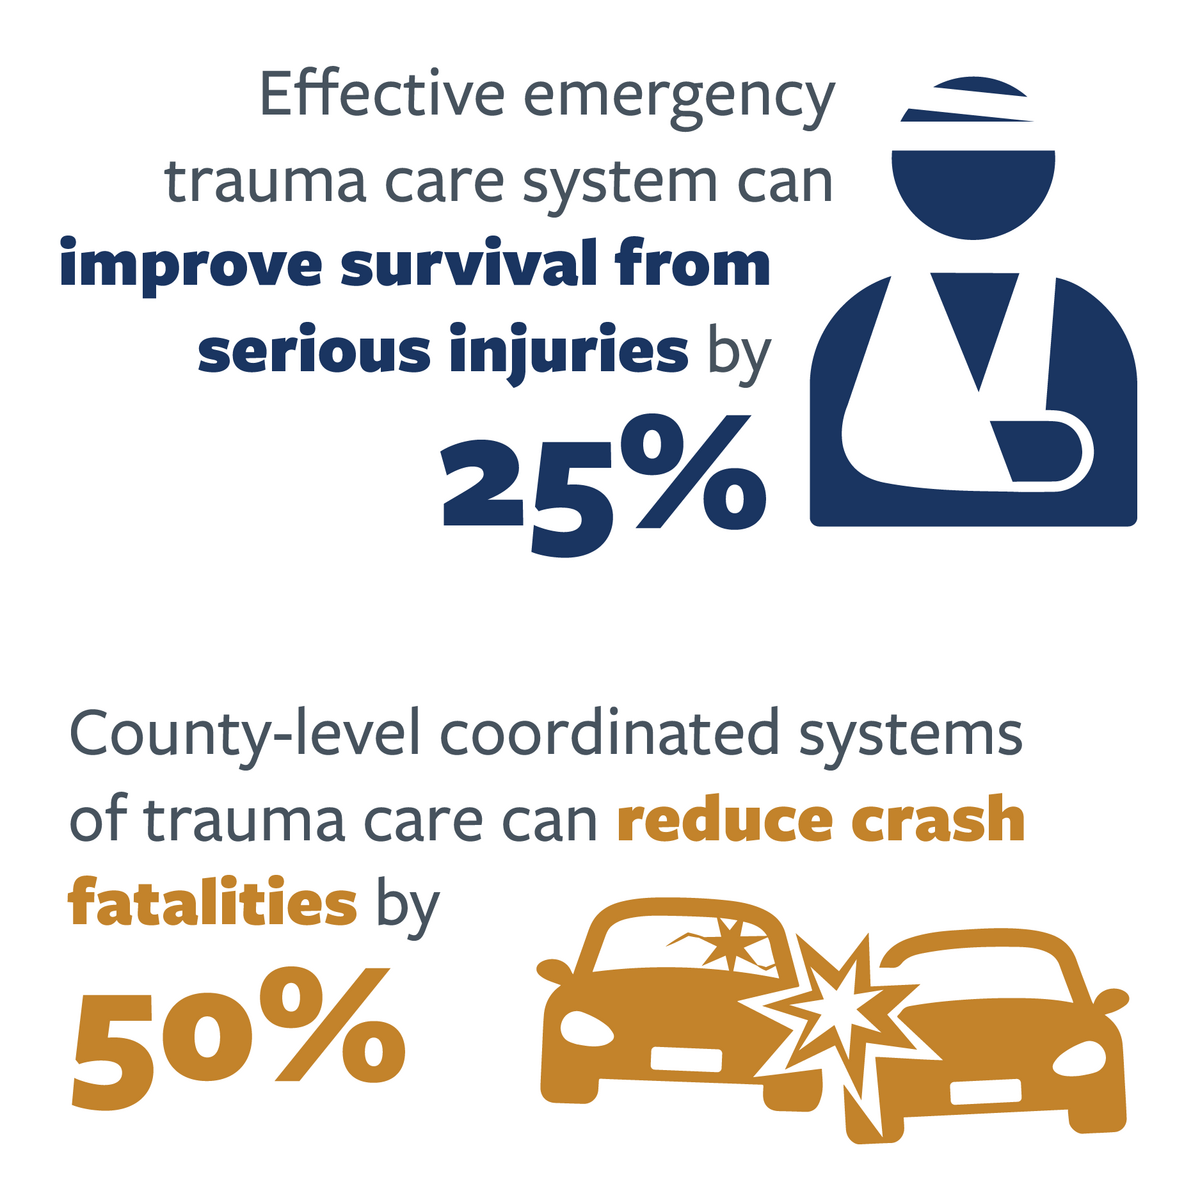 Infographic detailing improval in serious injury outcomes and reduction in fatalities through effective trauma care systems. For more information, see the following summary. 